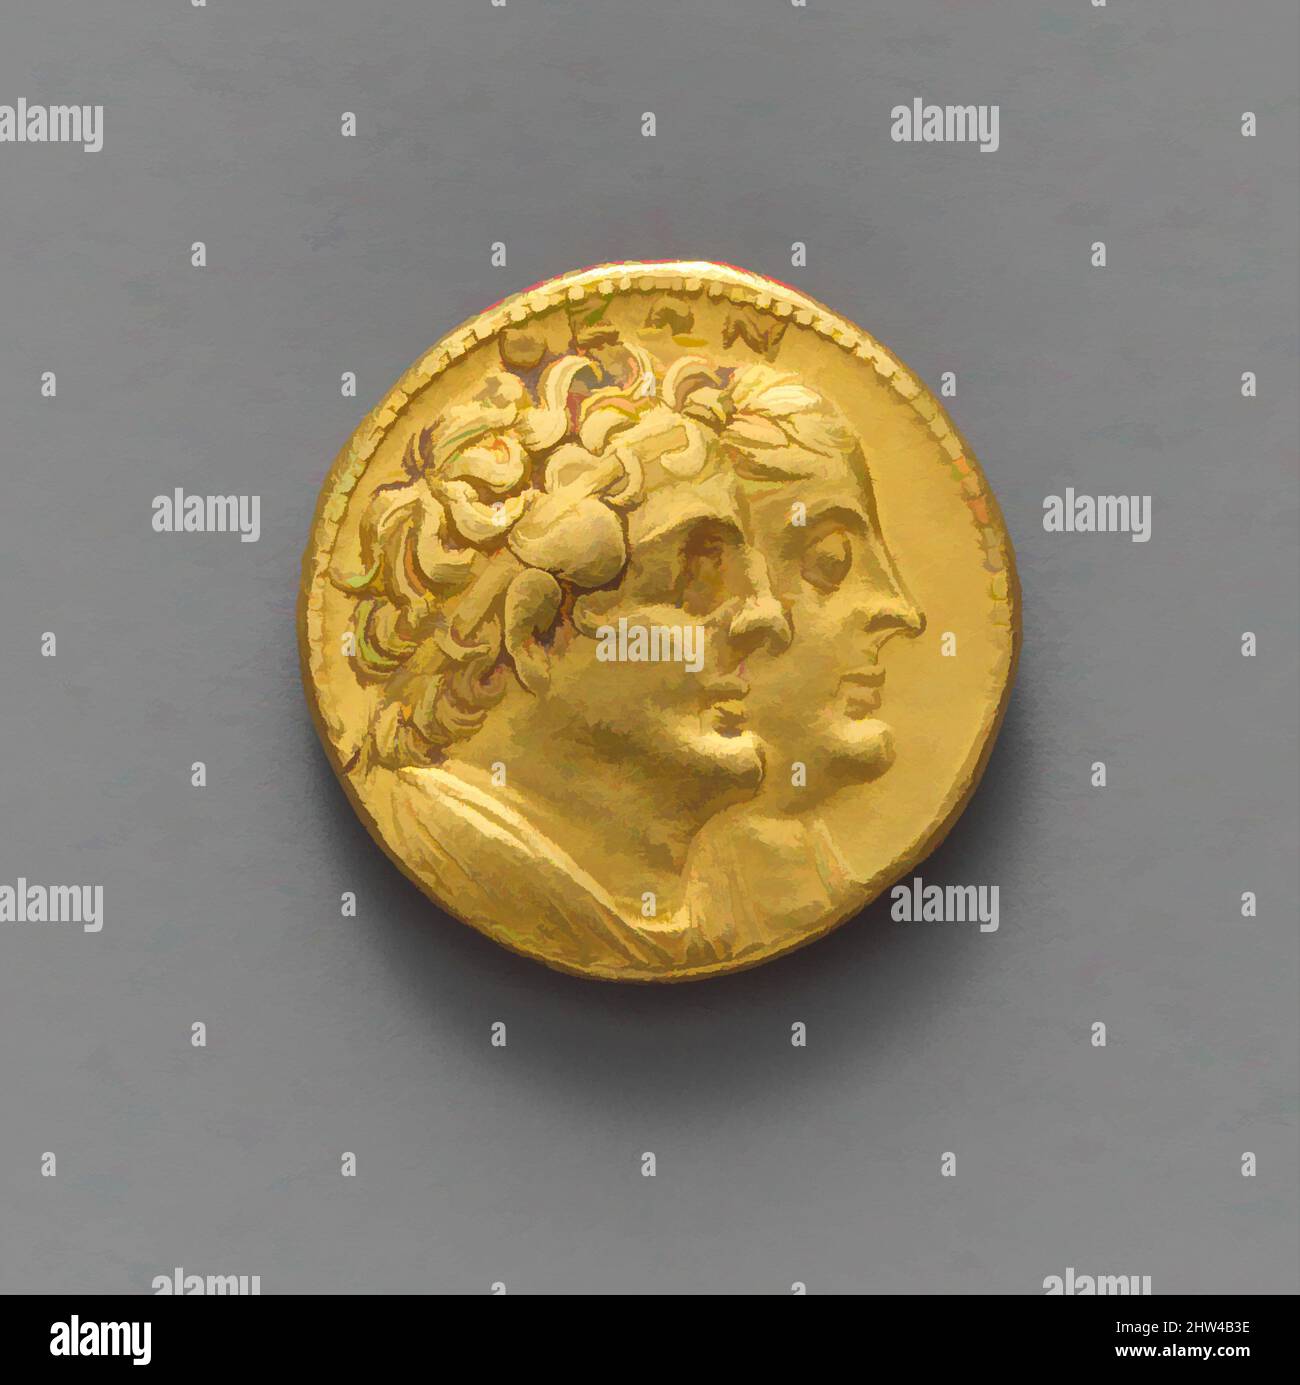 Art inspired by Gold oktadrachm of Ptolemy III Euergetes, Hellenistic, ca. 246–221 B.C., Greek, Ptolemaic, Gold, 1 in., 0oz. (2.5 cm, 27.77g), Coins, conjoined busts of Ptolemy II and Arsinoe II/conjoined busts of Ptolemy I and Berenike I, Alexandria, Classic works modernized by Artotop with a splash of modernity. Shapes, color and value, eye-catching visual impact on art. Emotions through freedom of artworks in a contemporary way. A timeless message pursuing a wildly creative new direction. Artists turning to the digital medium and creating the Artotop NFT Stock Photo